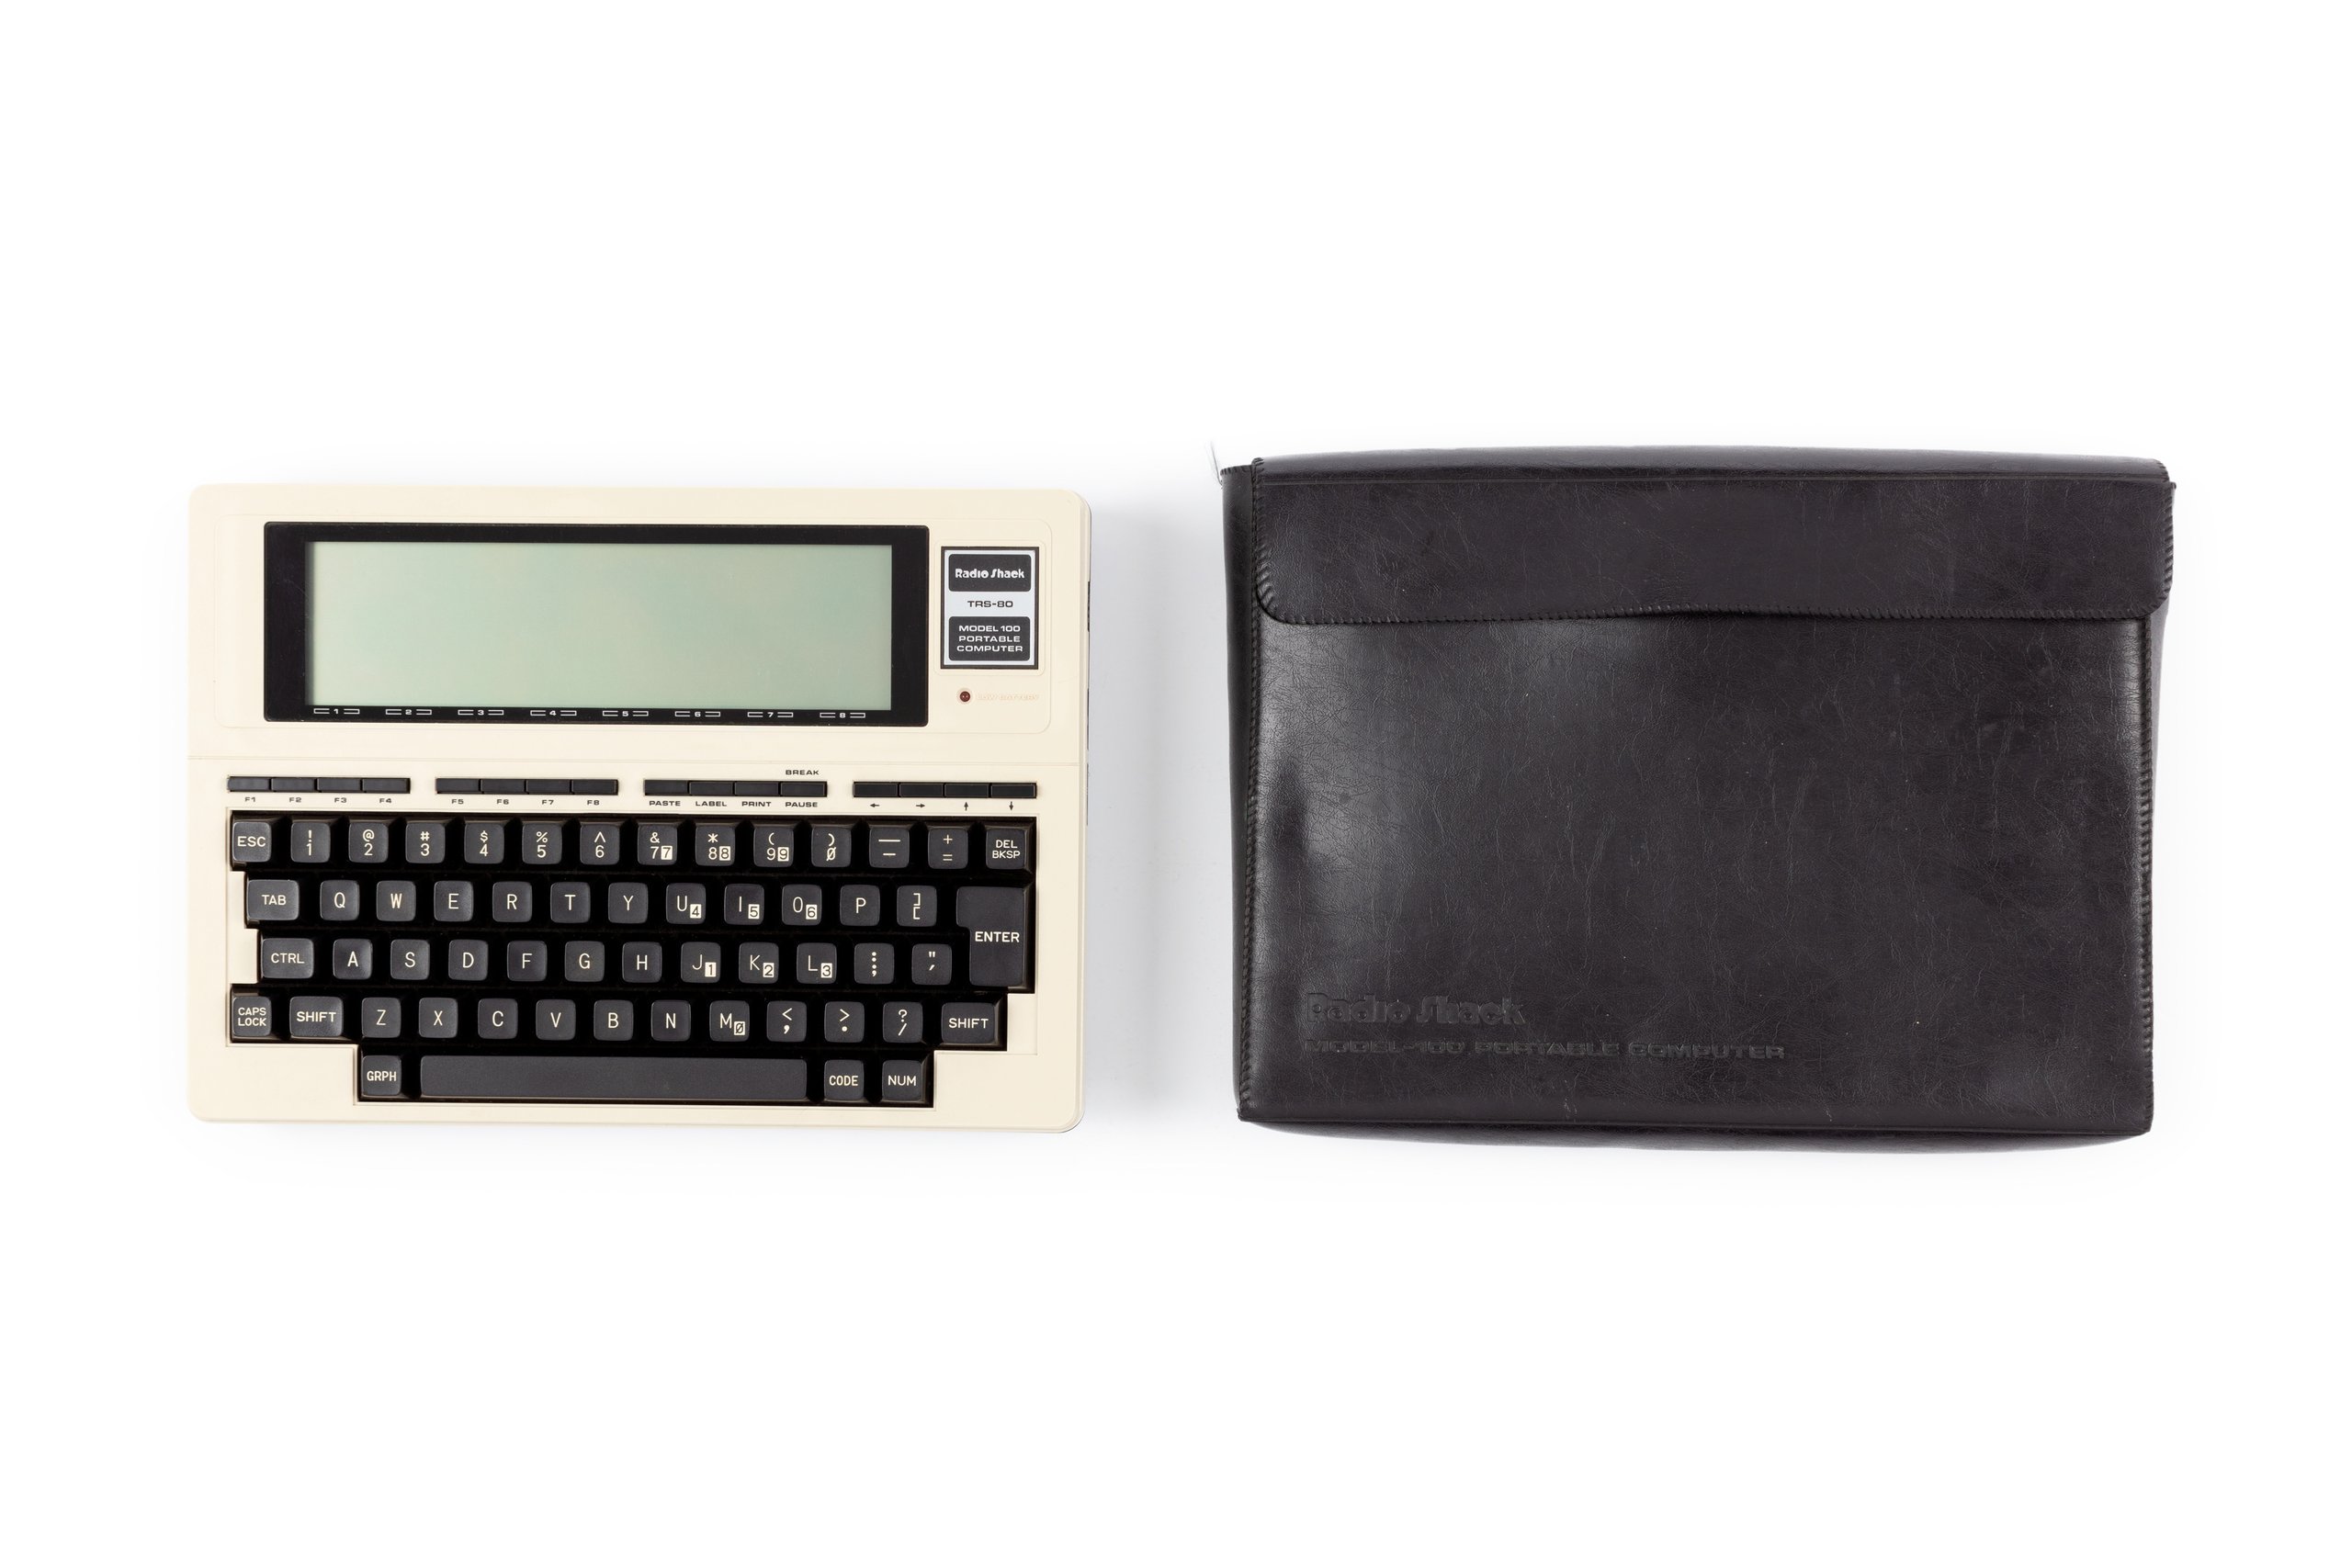 Portable computer and accessories by Tandy Corporation